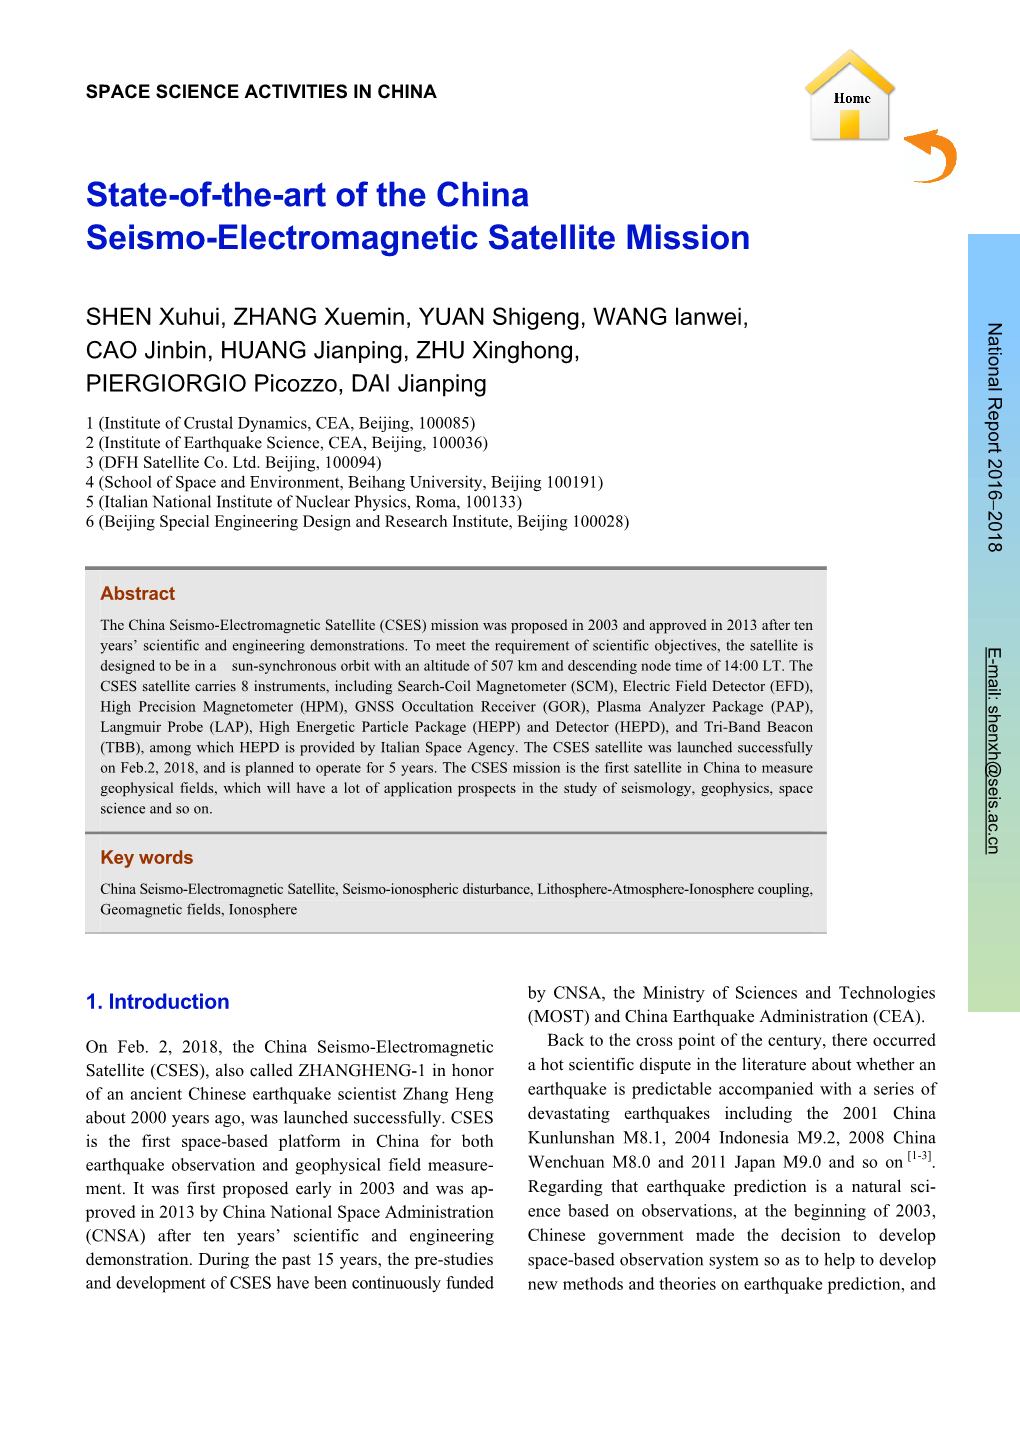 State-Of-The-Art of the China Seismo-Electromagnetic Satellite Mission